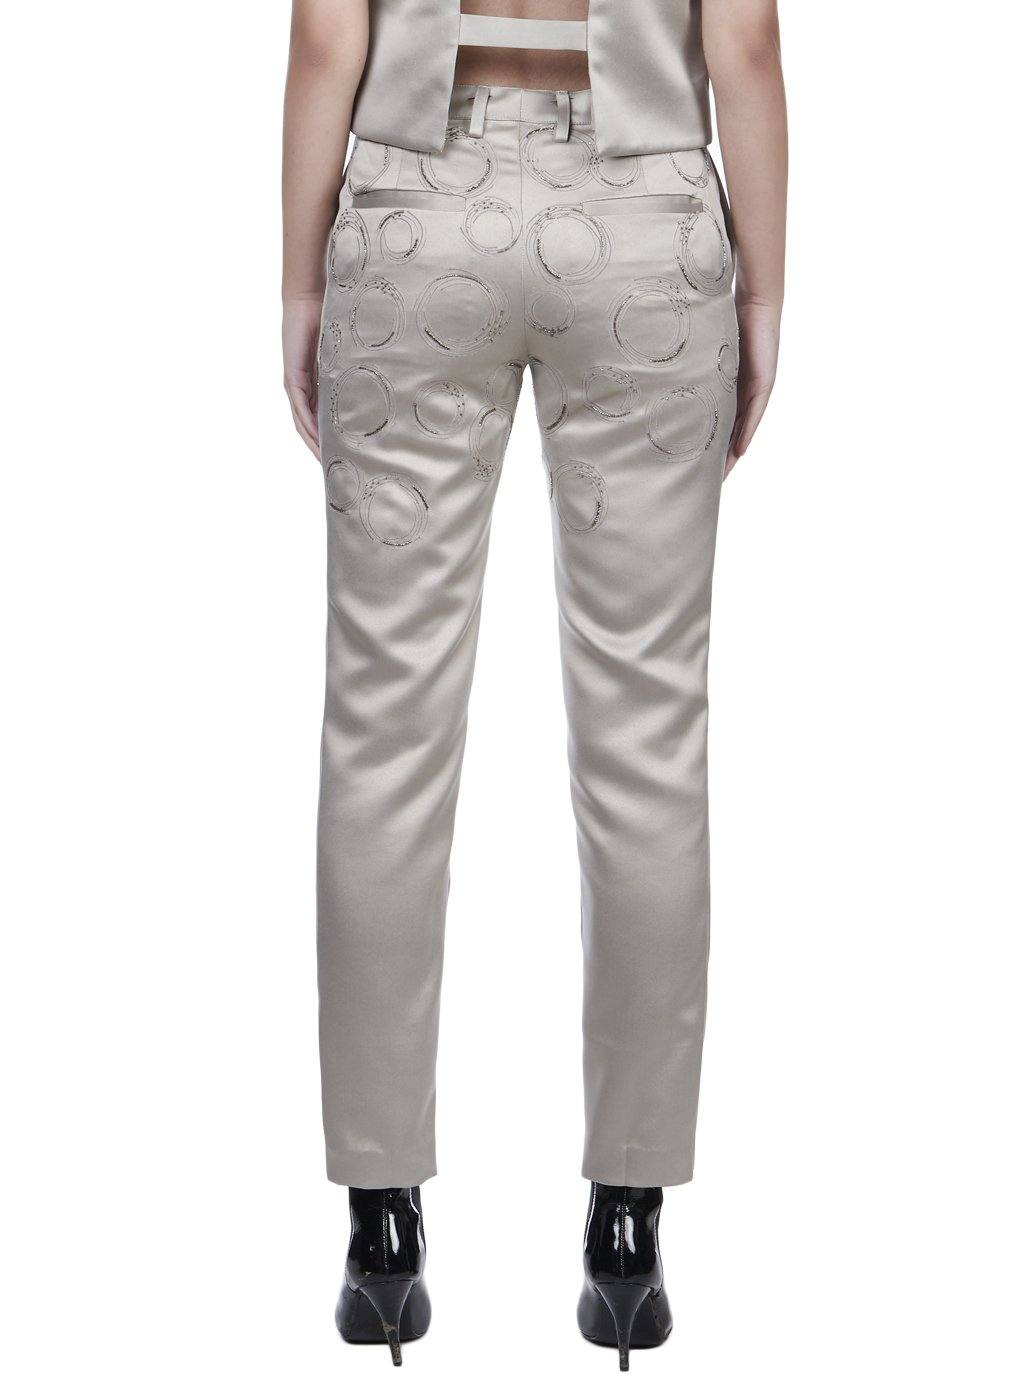 MELODRAMA TROUSERS - Genes online store 2020